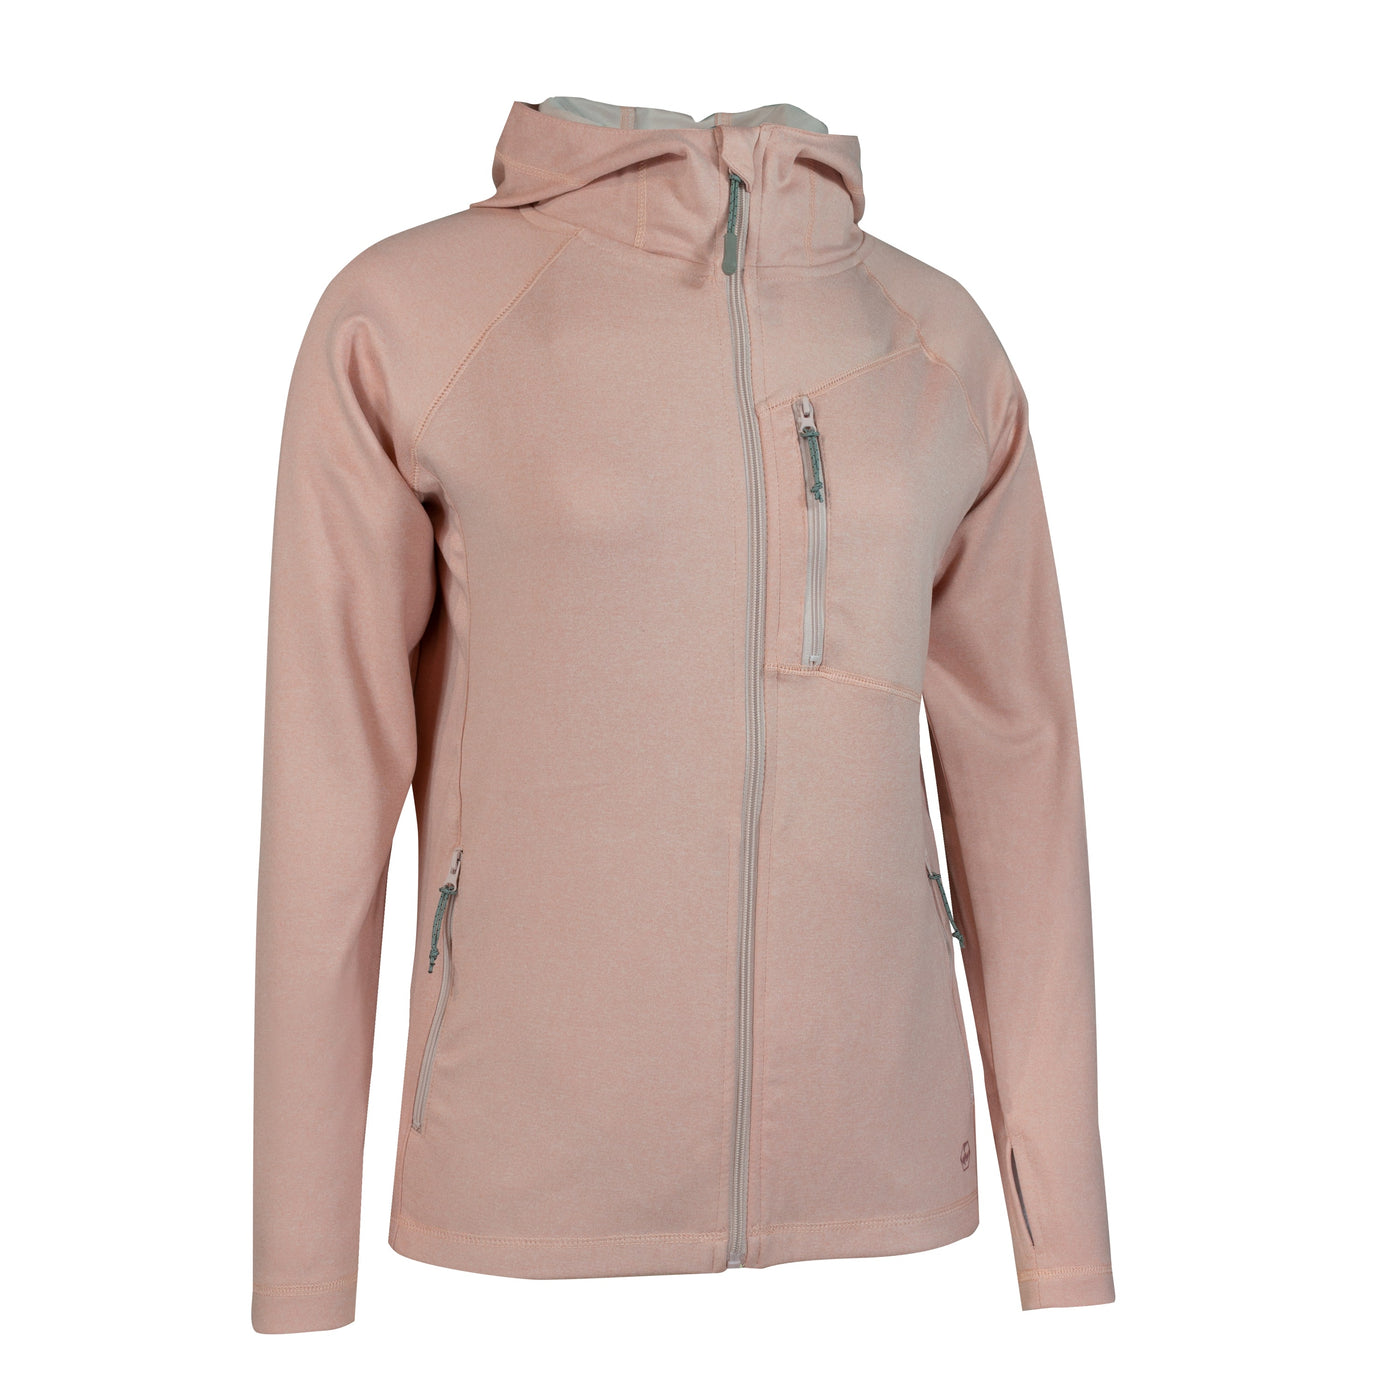 JACKFIELD HOODED SWEAT SHIRT POLY SPANDEX FOR WOMEN